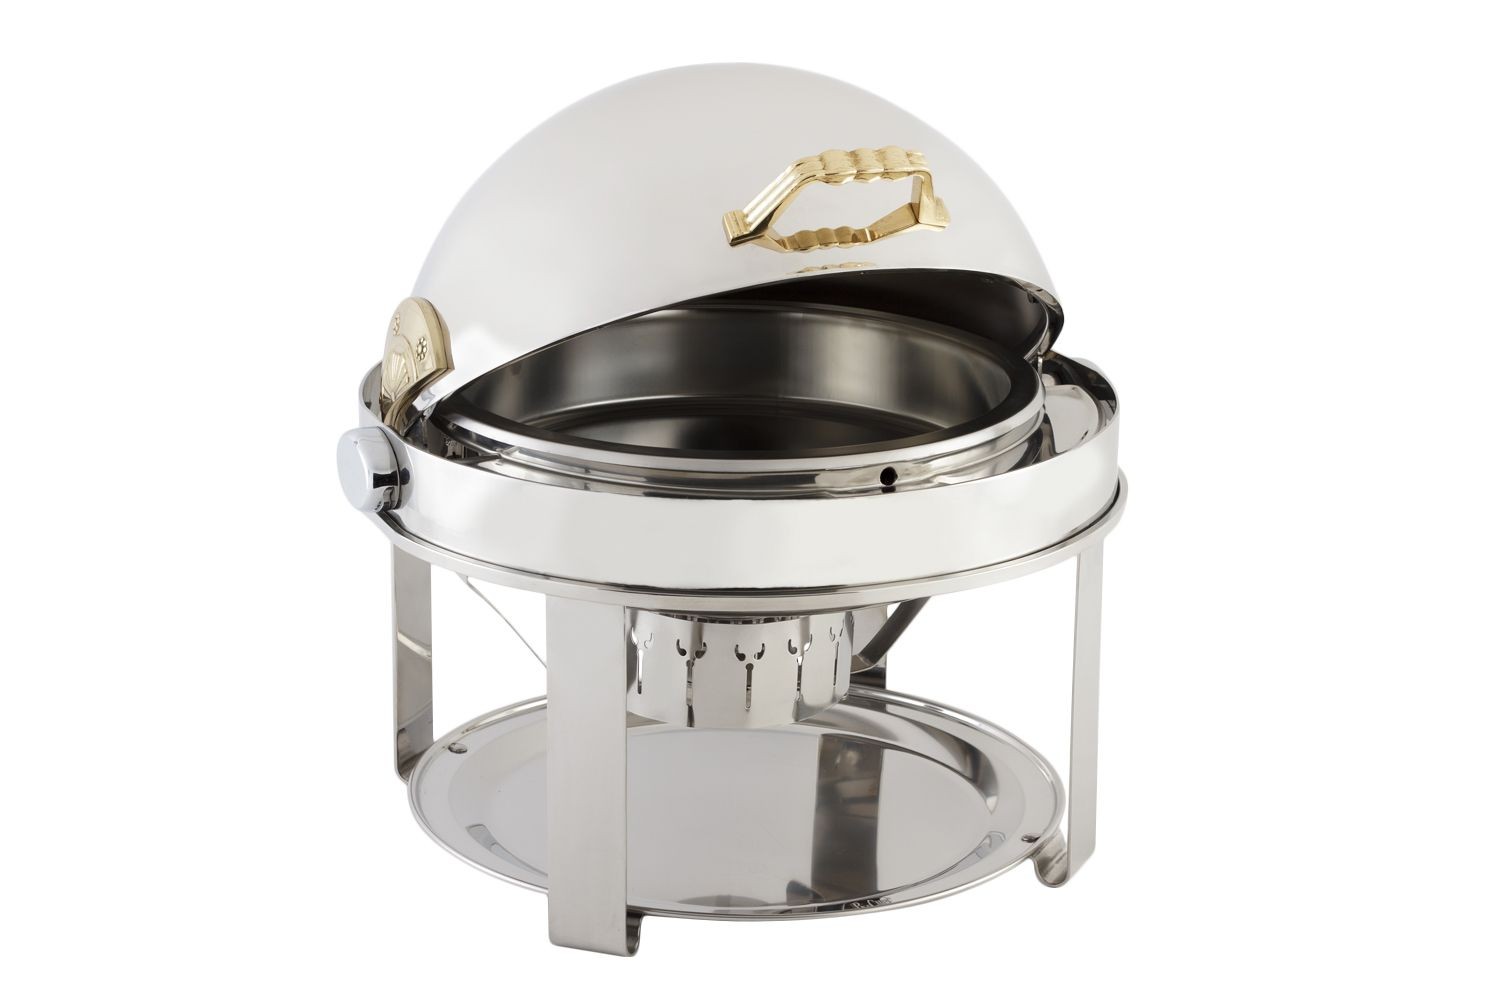 Bon Chef 12010 Elite Stainless Steel Round Chafer with Contemporary Legs, 8 Qt.